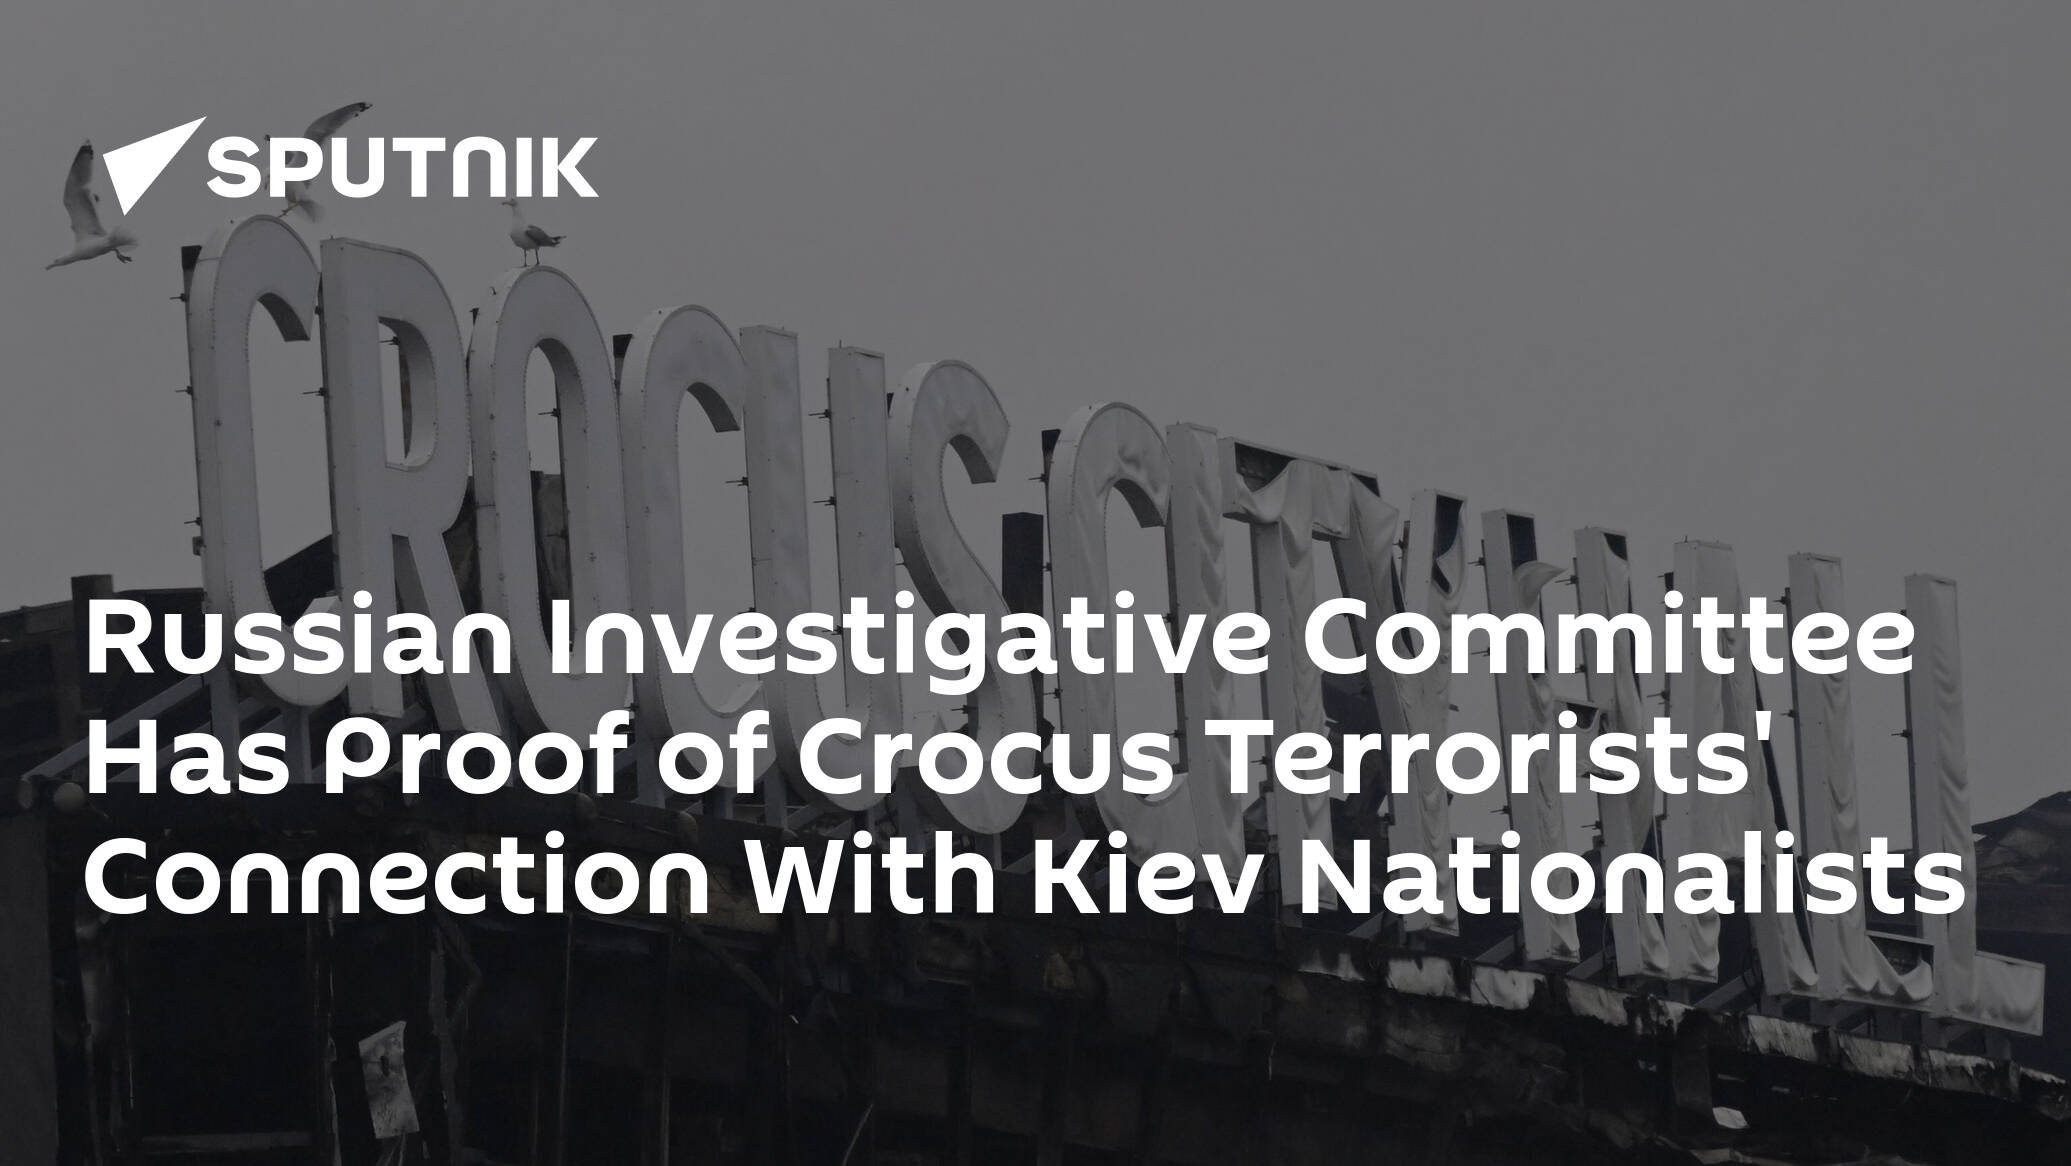 Russian Investigative Committee Has Proof of Crocus Terrorists' Connection With